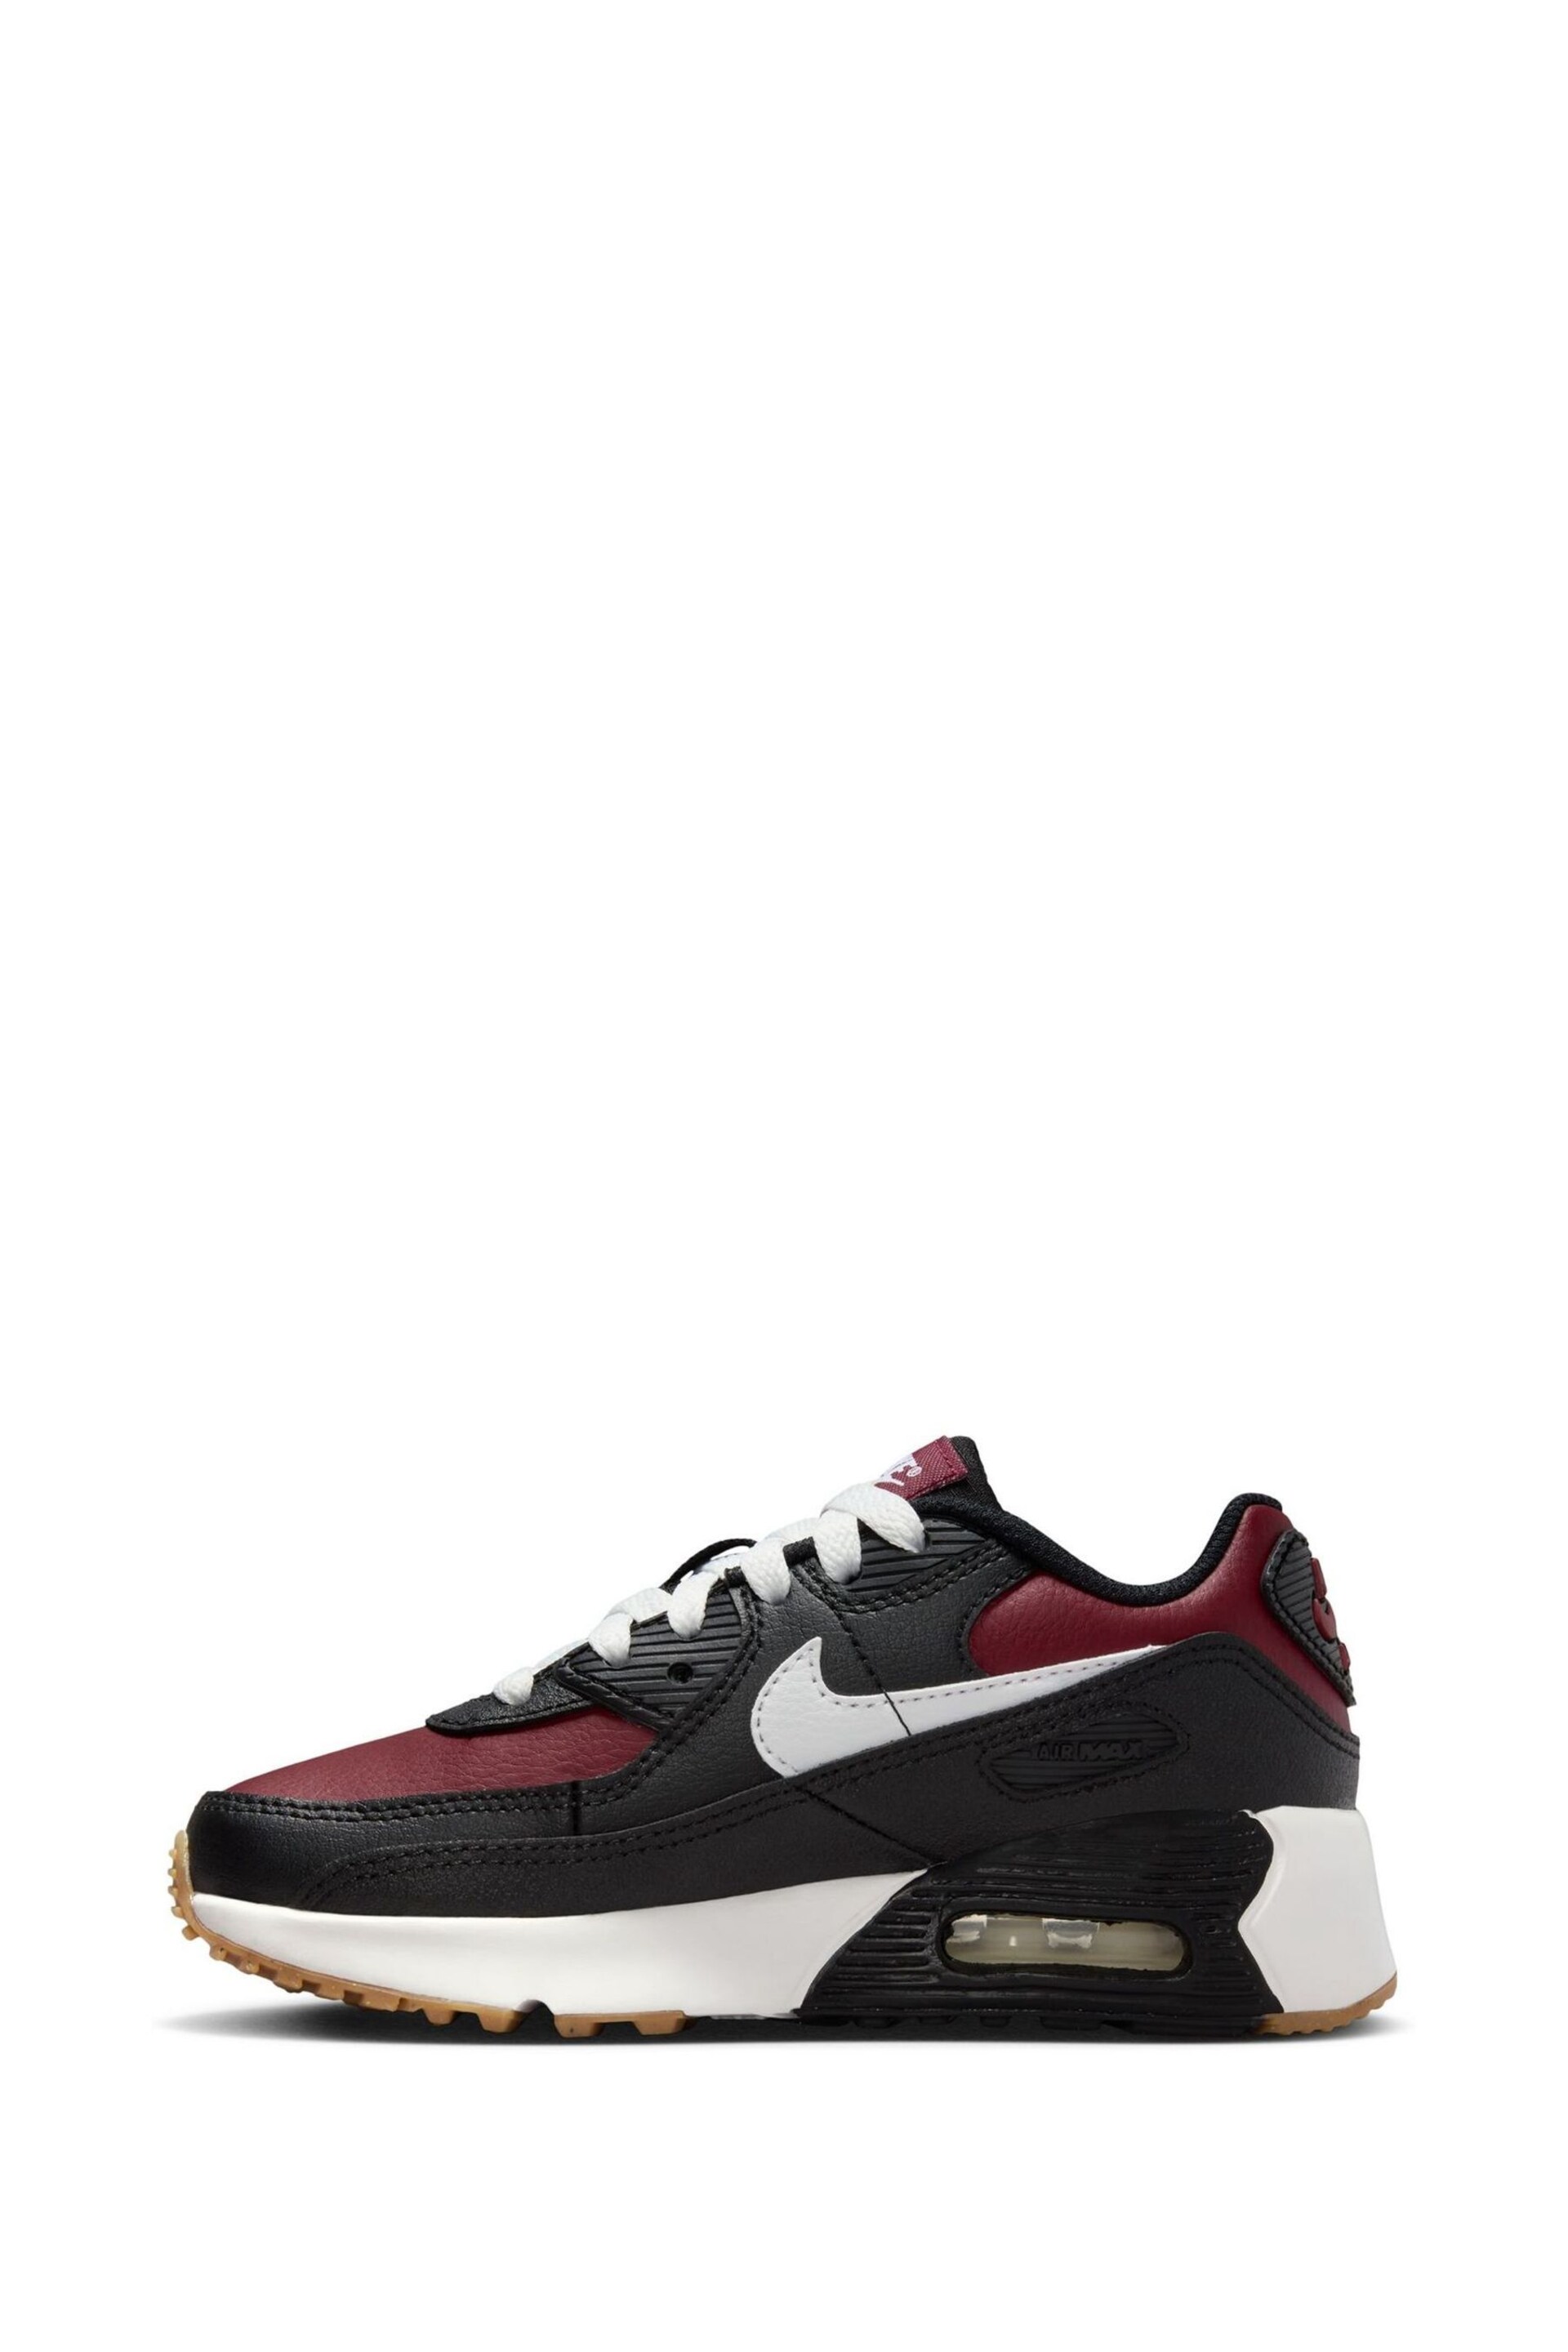 Nike Black/White/Red Air Max 90 Junior Trainers - Image 2 of 8